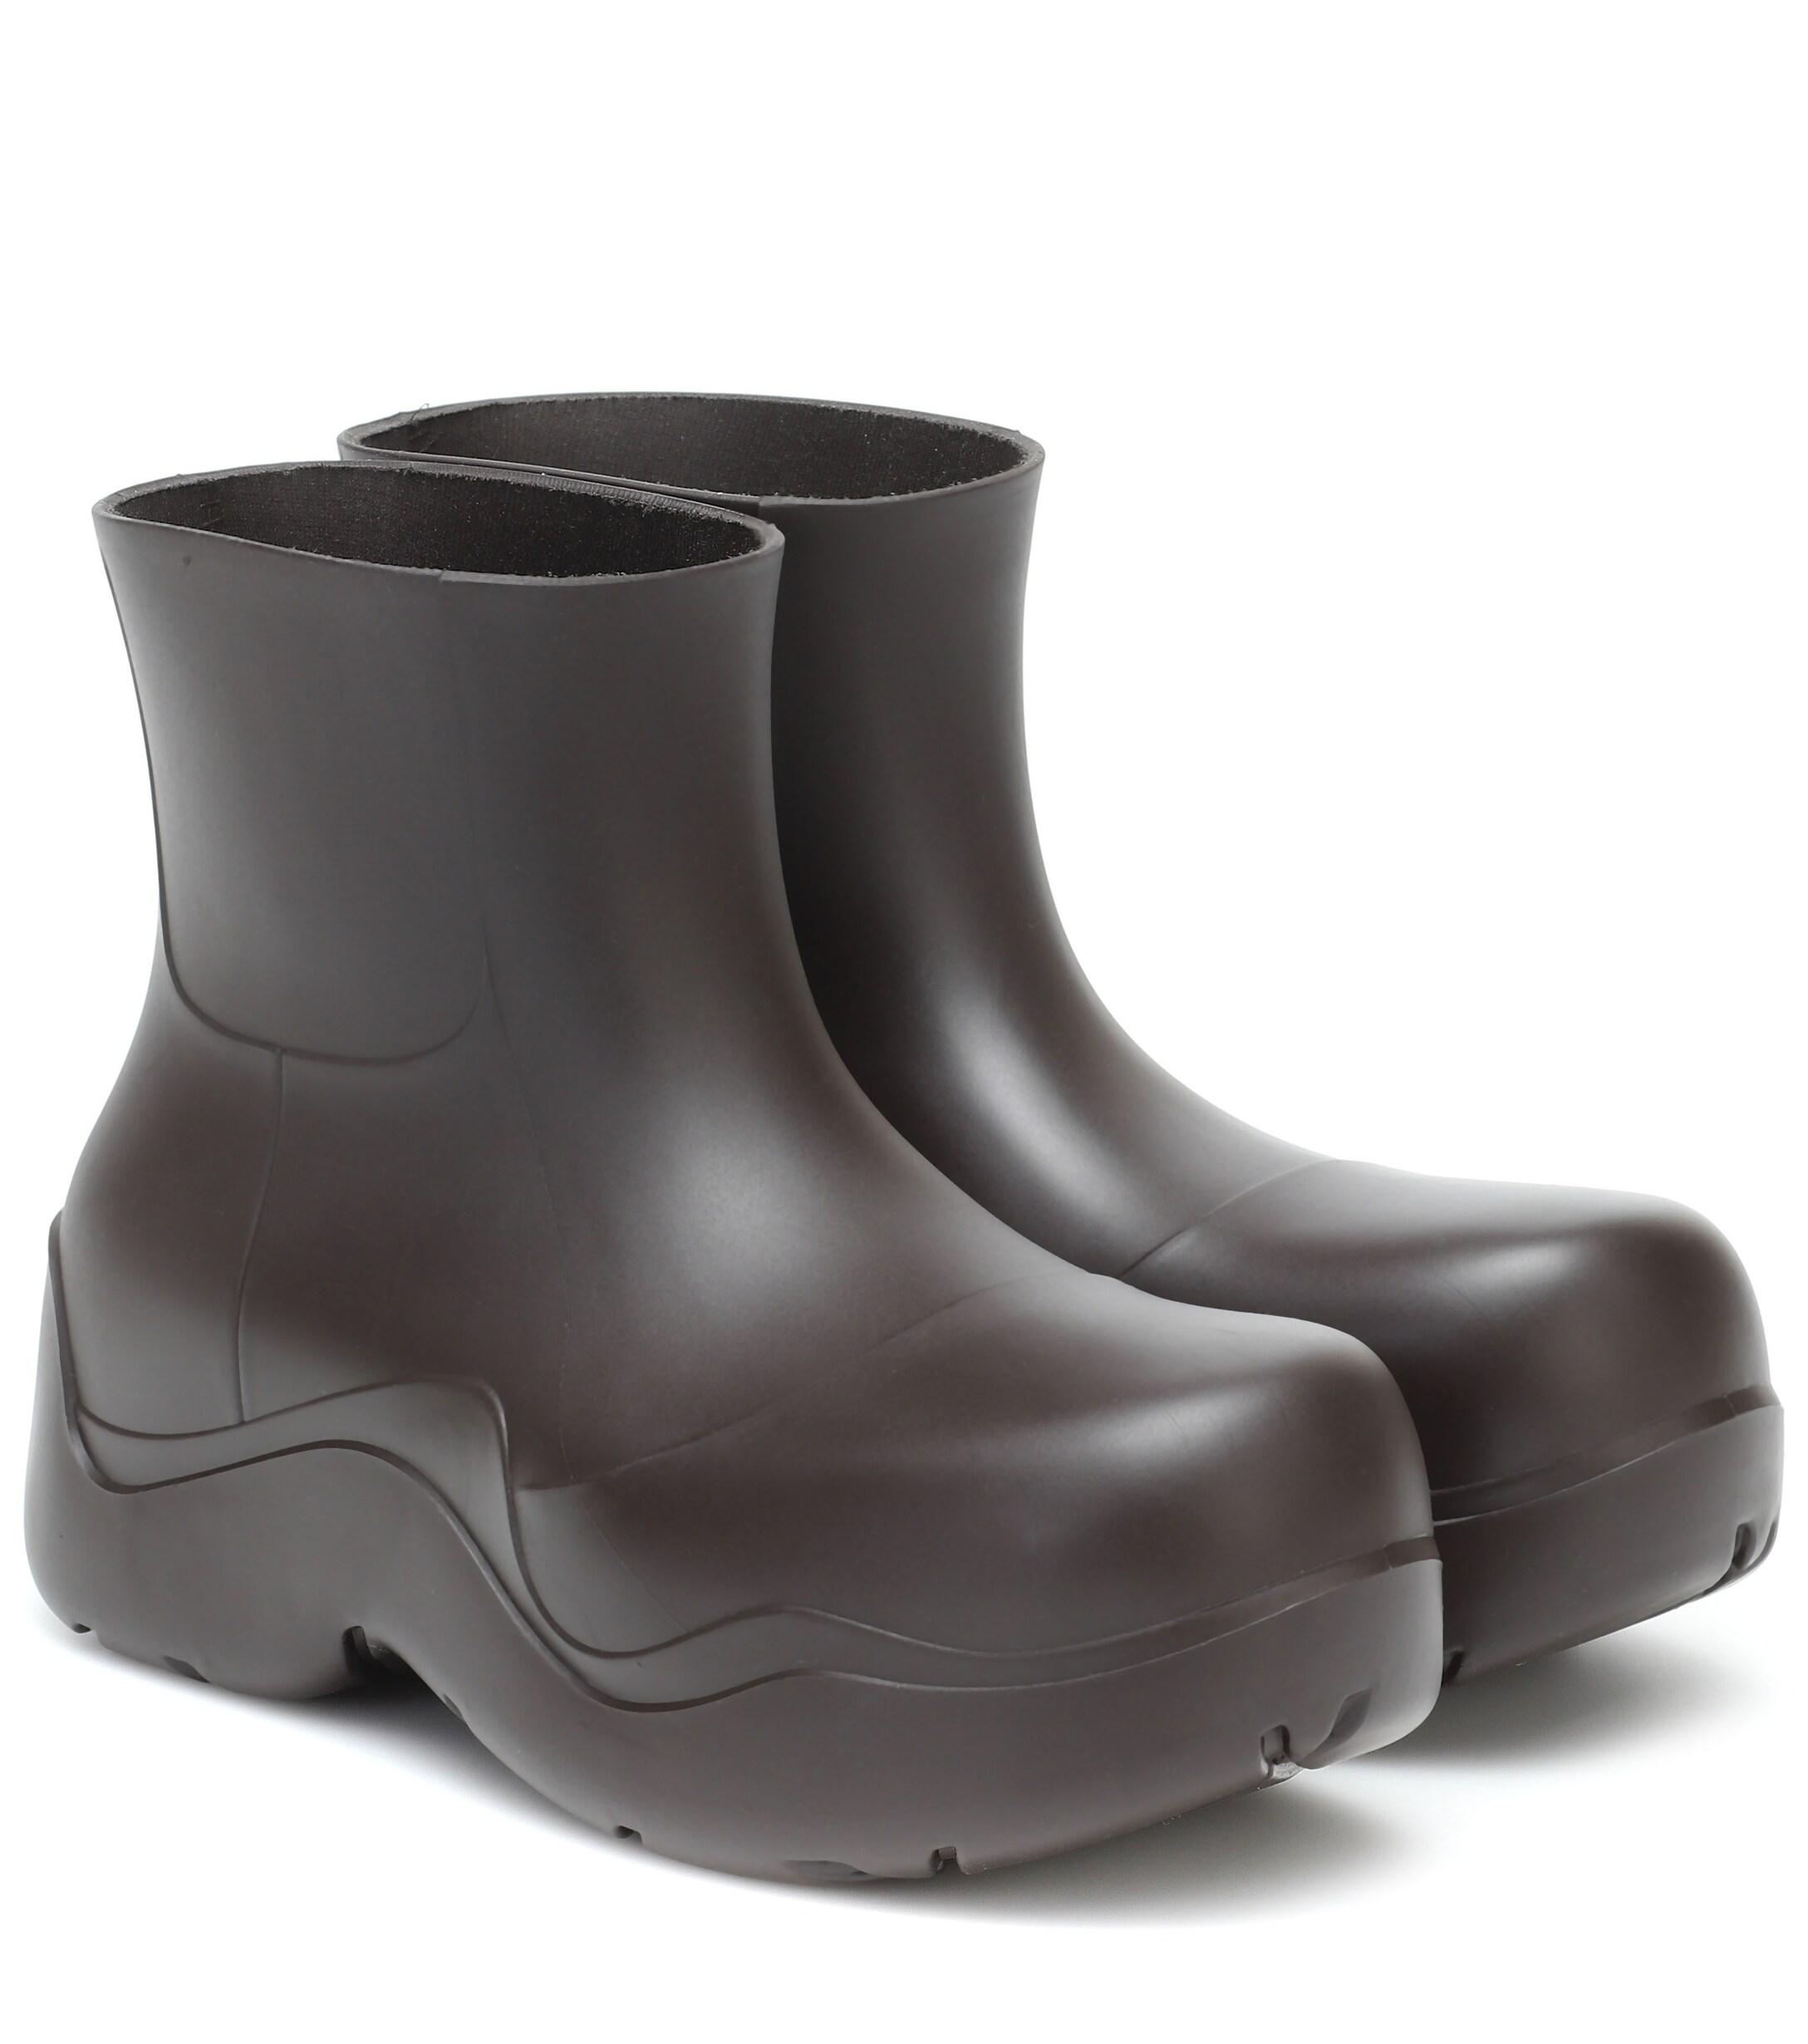 Bottega Veneta The Puddle Boots In Rubber in Brown | Lyst Canada